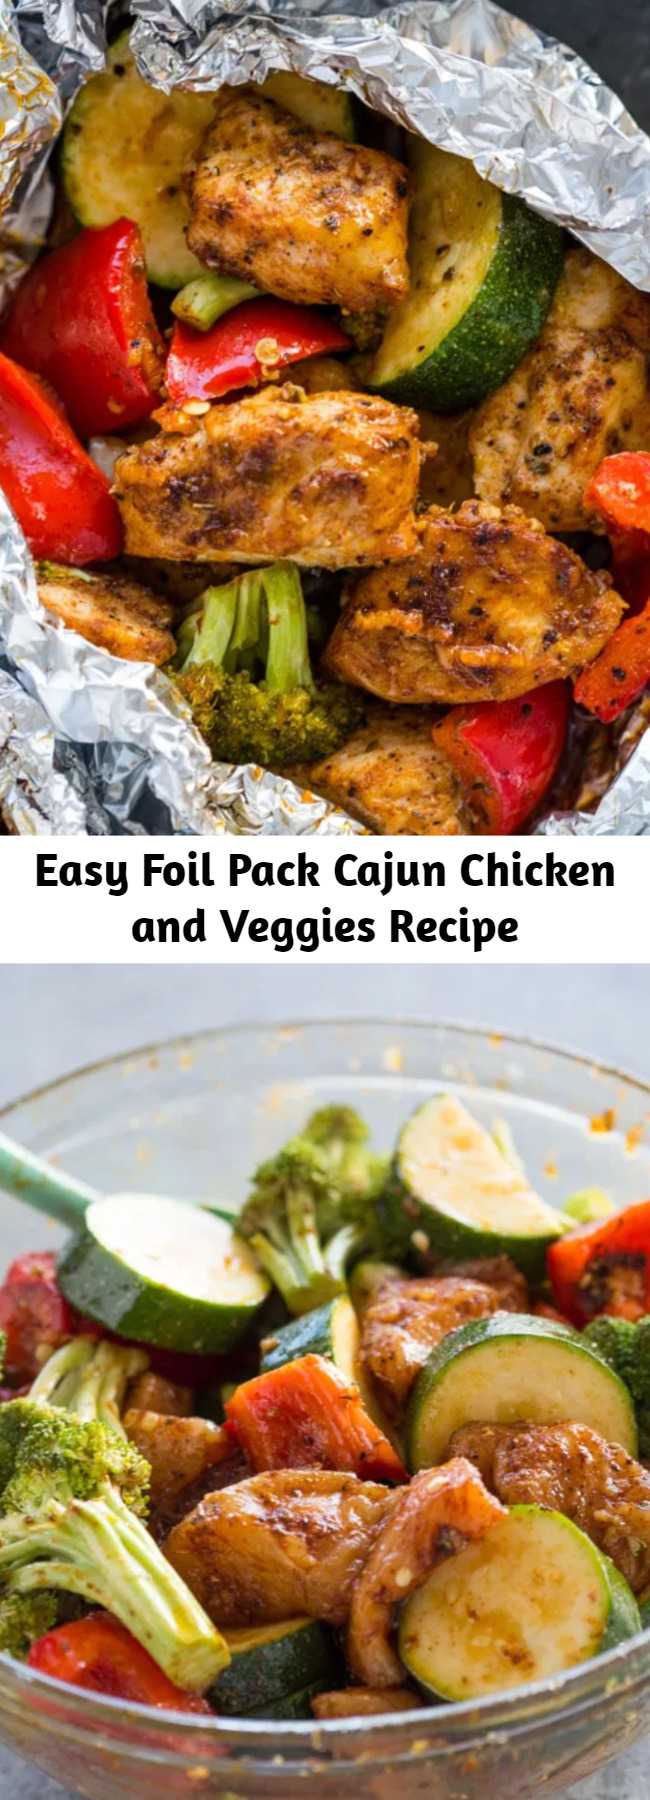 Easy Foil Pack Cajun Chicken and Veggies Recipe - Quick 30-minute chicken and veggies flavored with Cajun seasoning, garlic, and olive oil. These flavorful flavor packs are super healthy and make a delicious low-carb dinner.